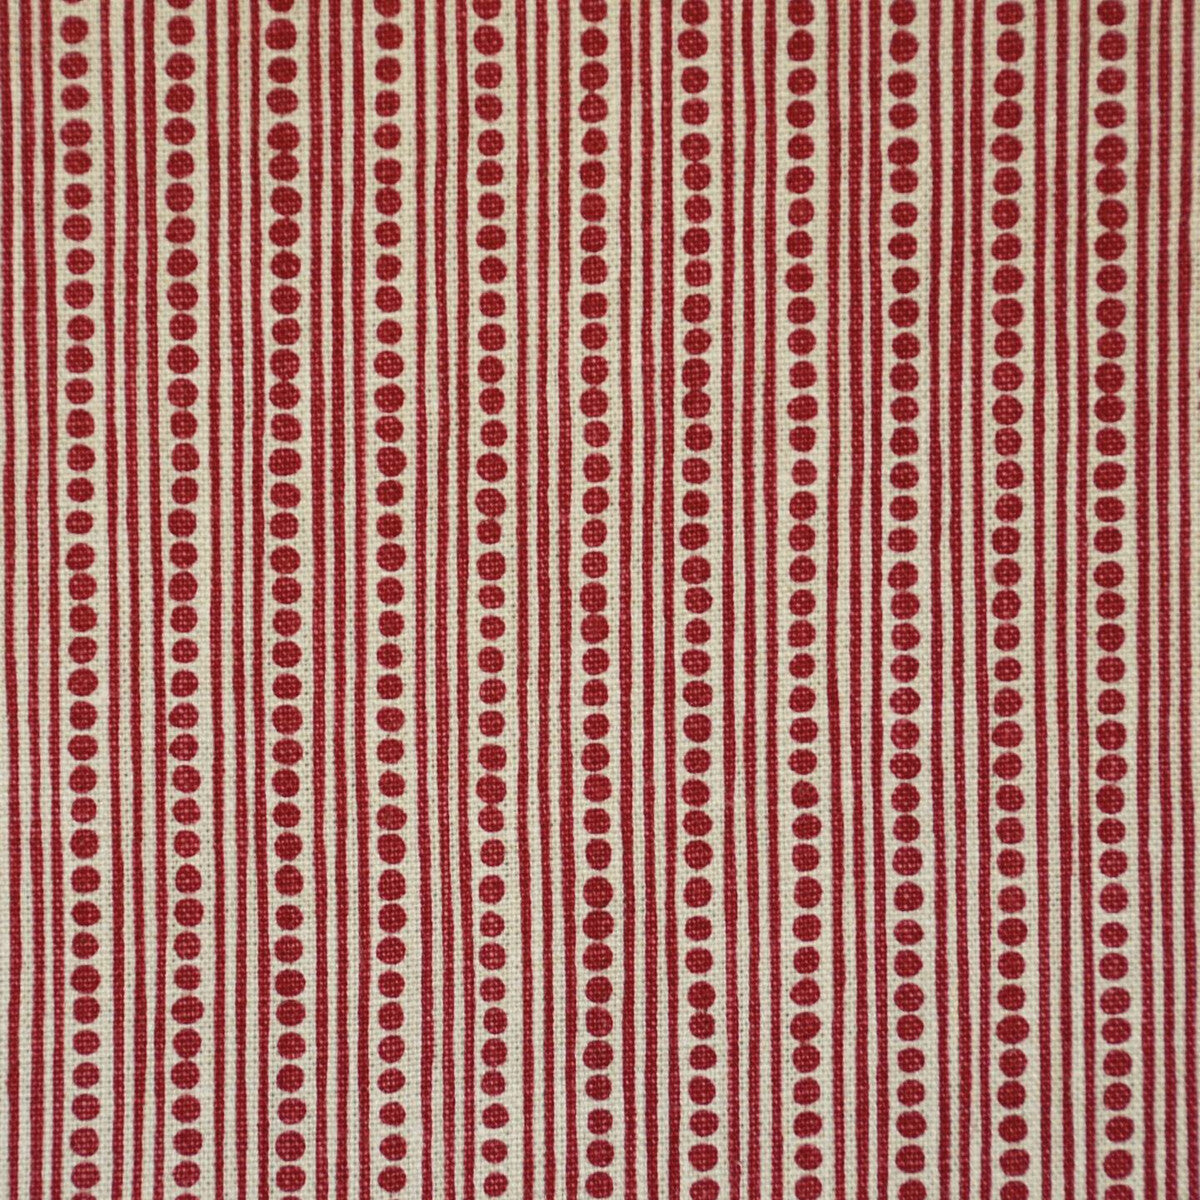 Wicklewood Reverse fabric in red color - pattern BFC-3627.19.0 - by Lee Jofa in the Blithfield collection